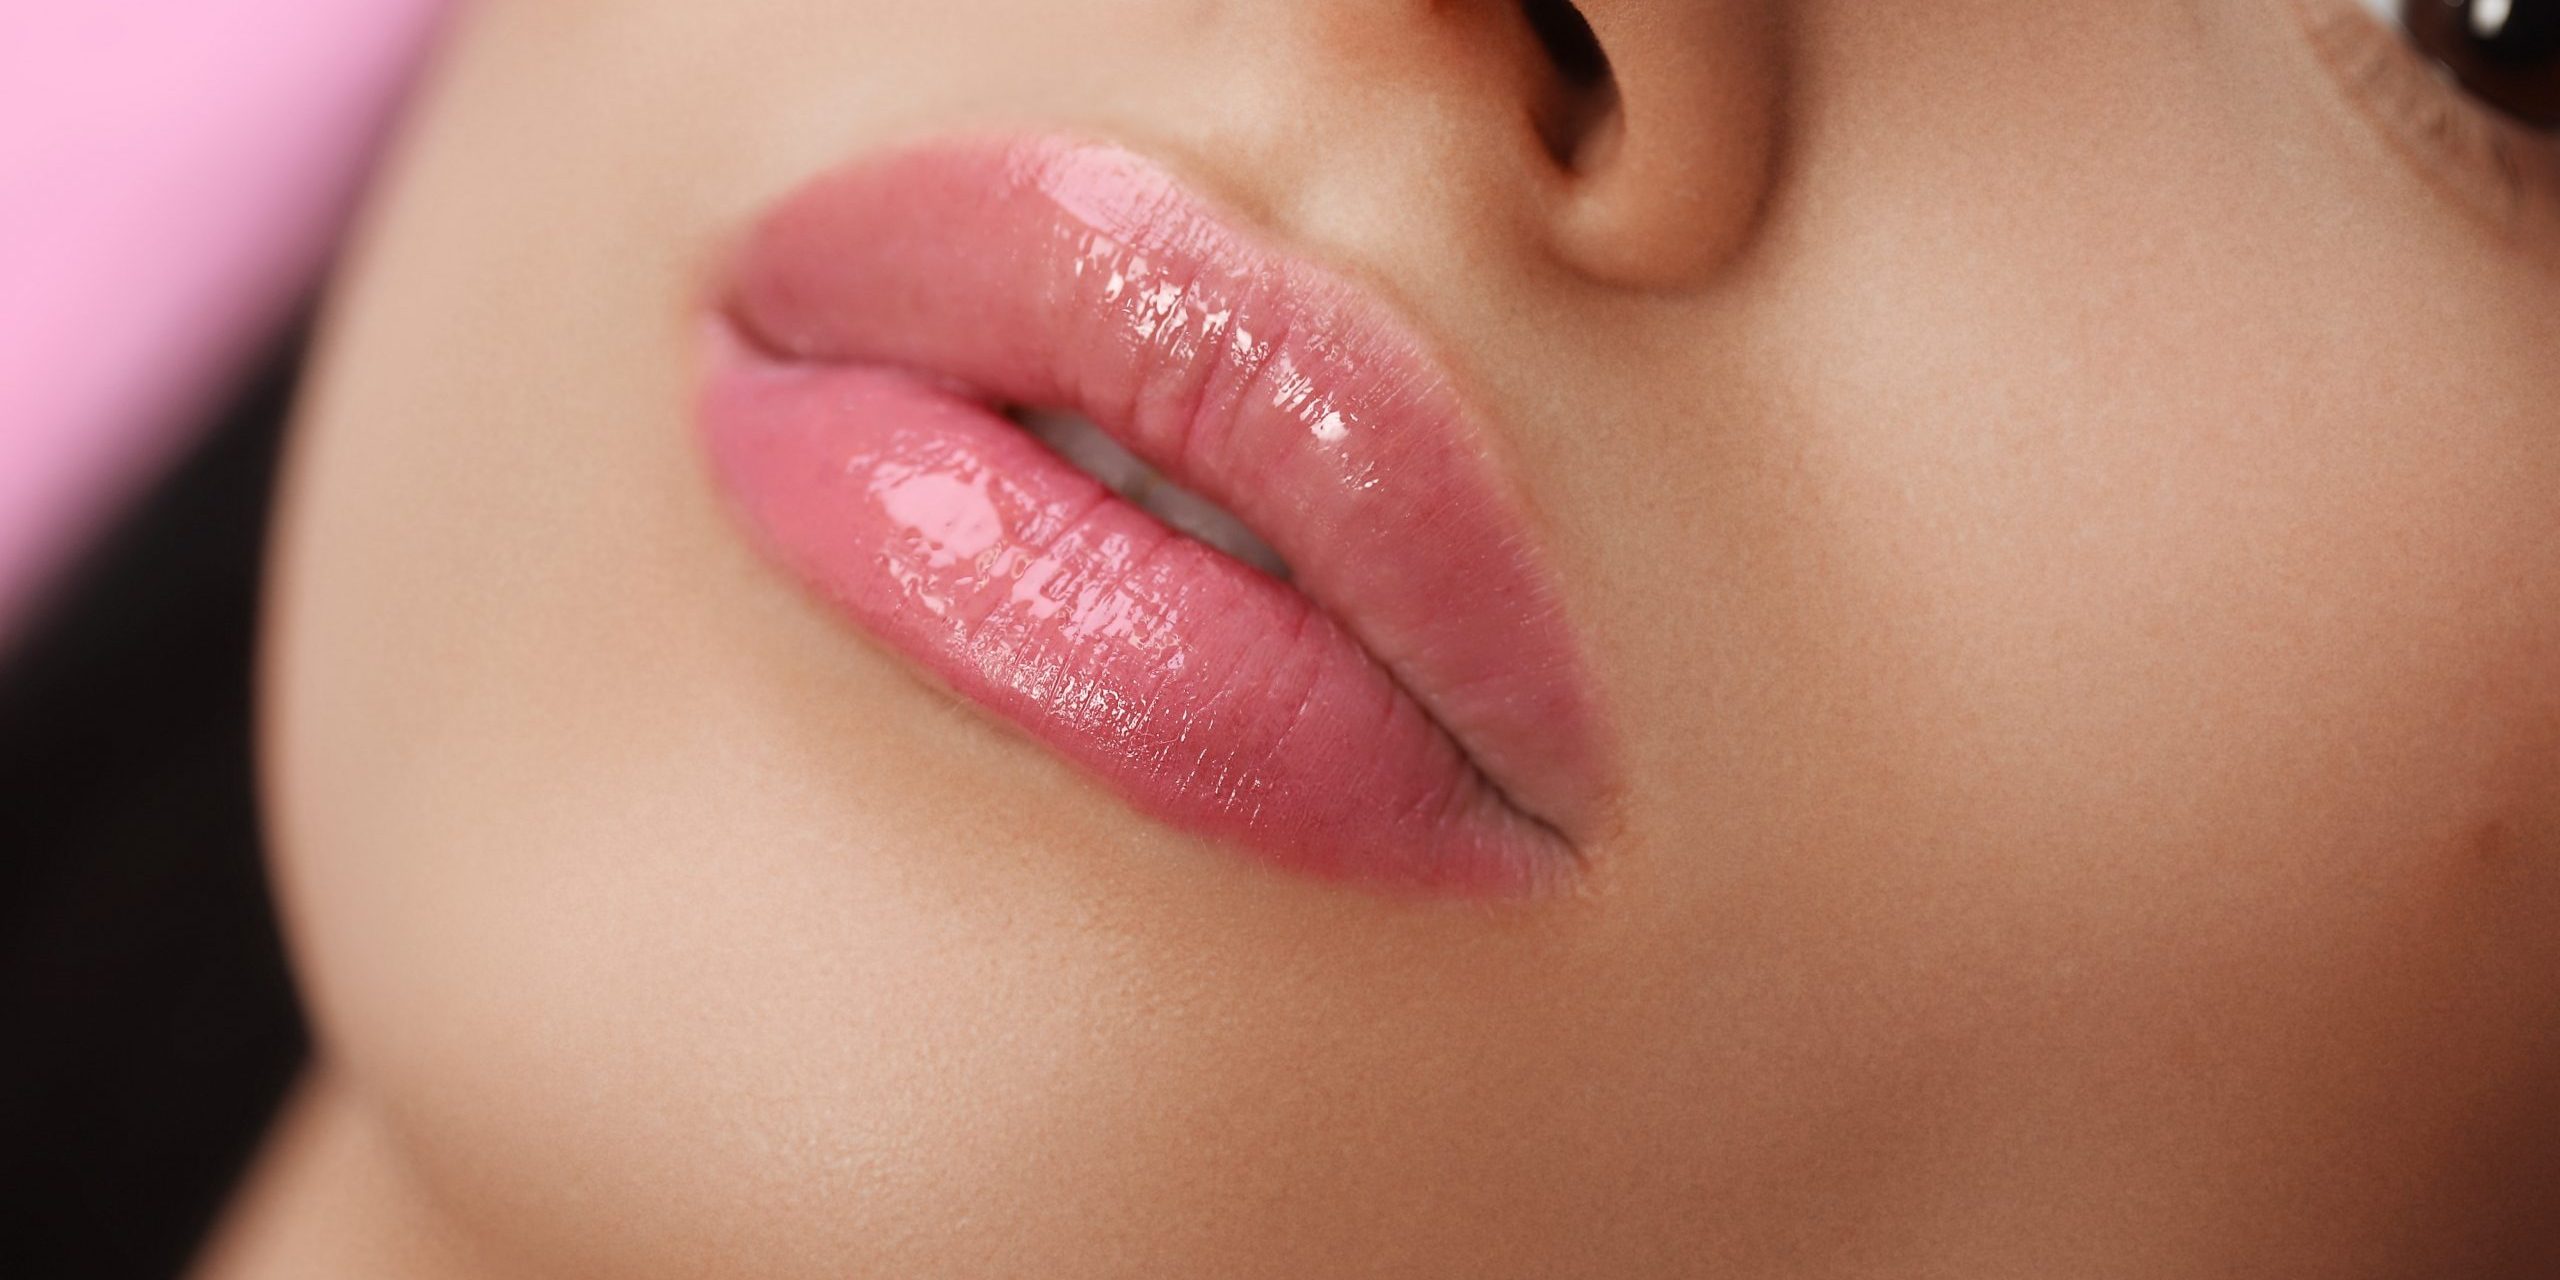 Lip filler can solve a variety of issues - Abilene TX